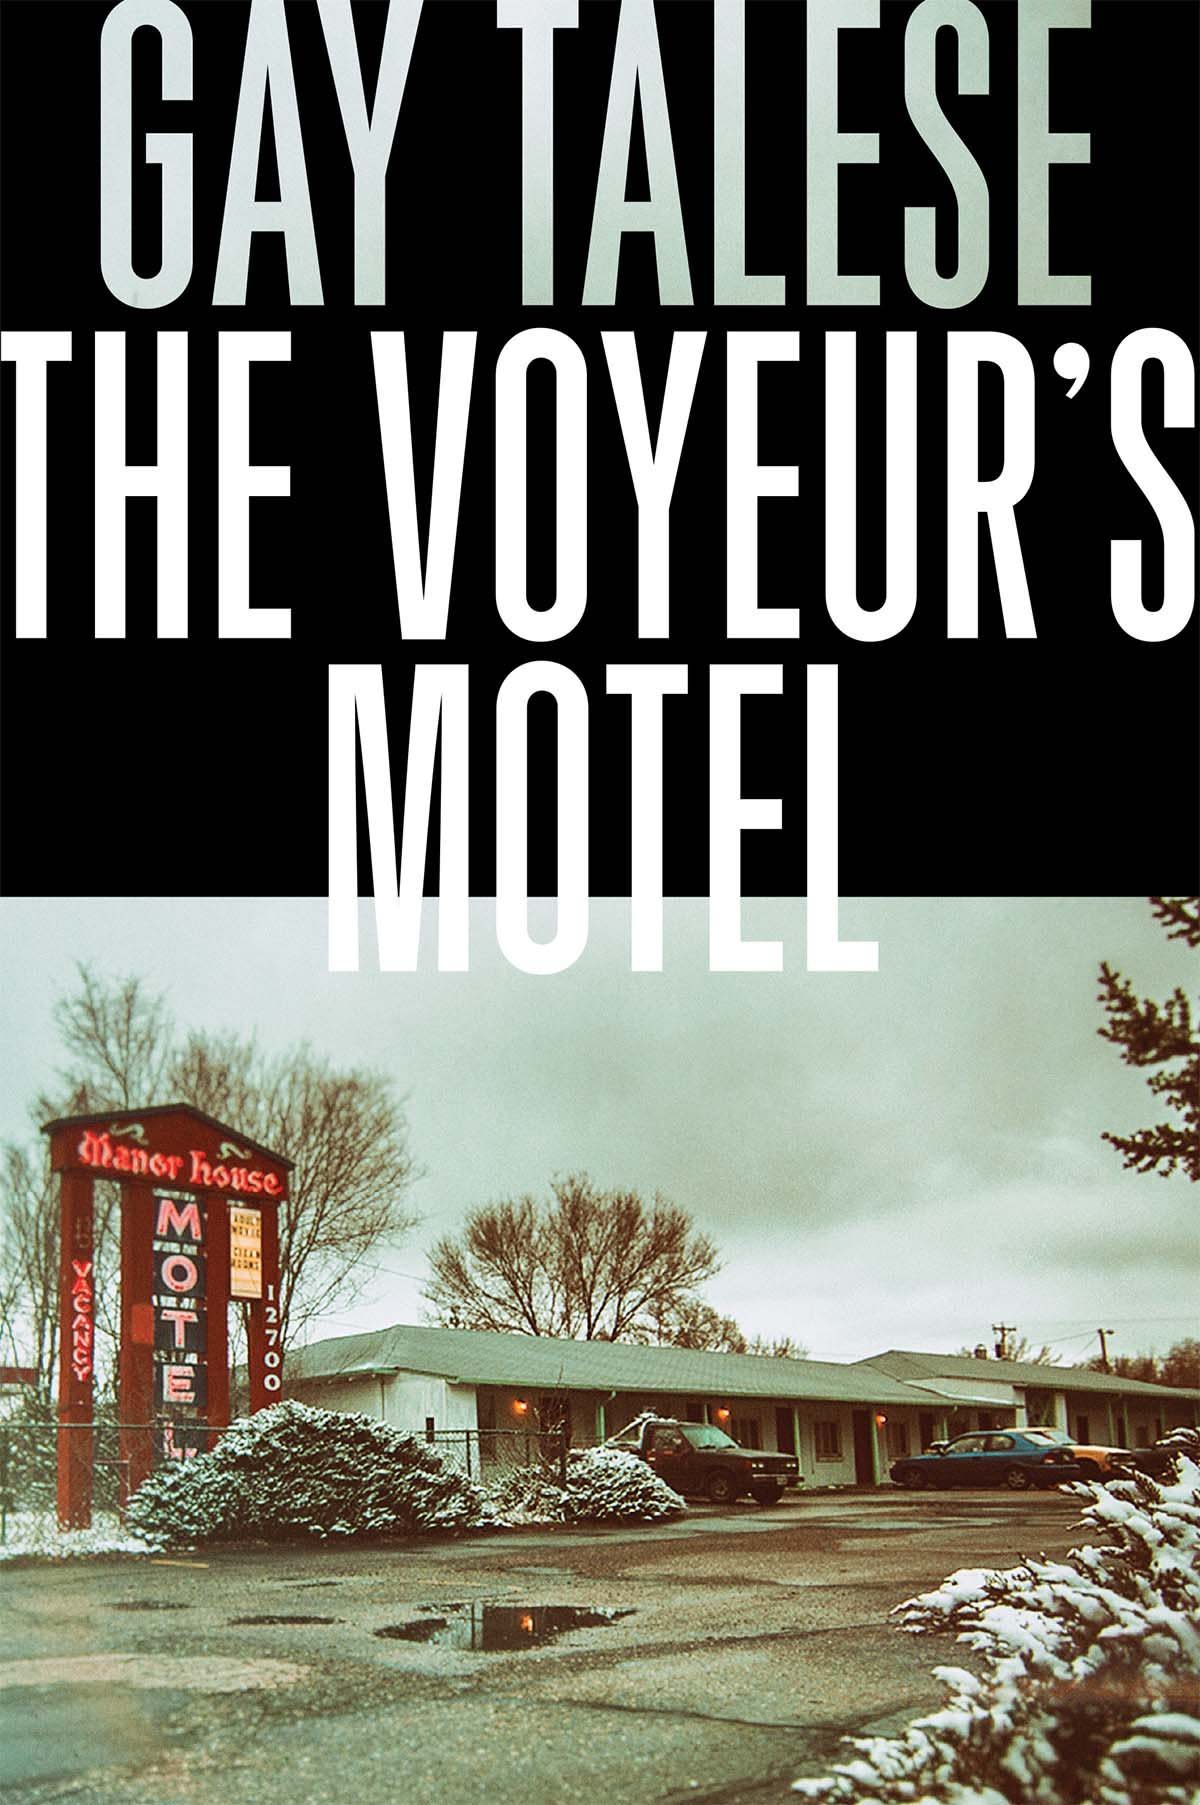 Author Gay Talese Flip-Flops On The Voyeurs Motel And Now Stands By Book While Filmmakers Try To Figure Out Next Steps